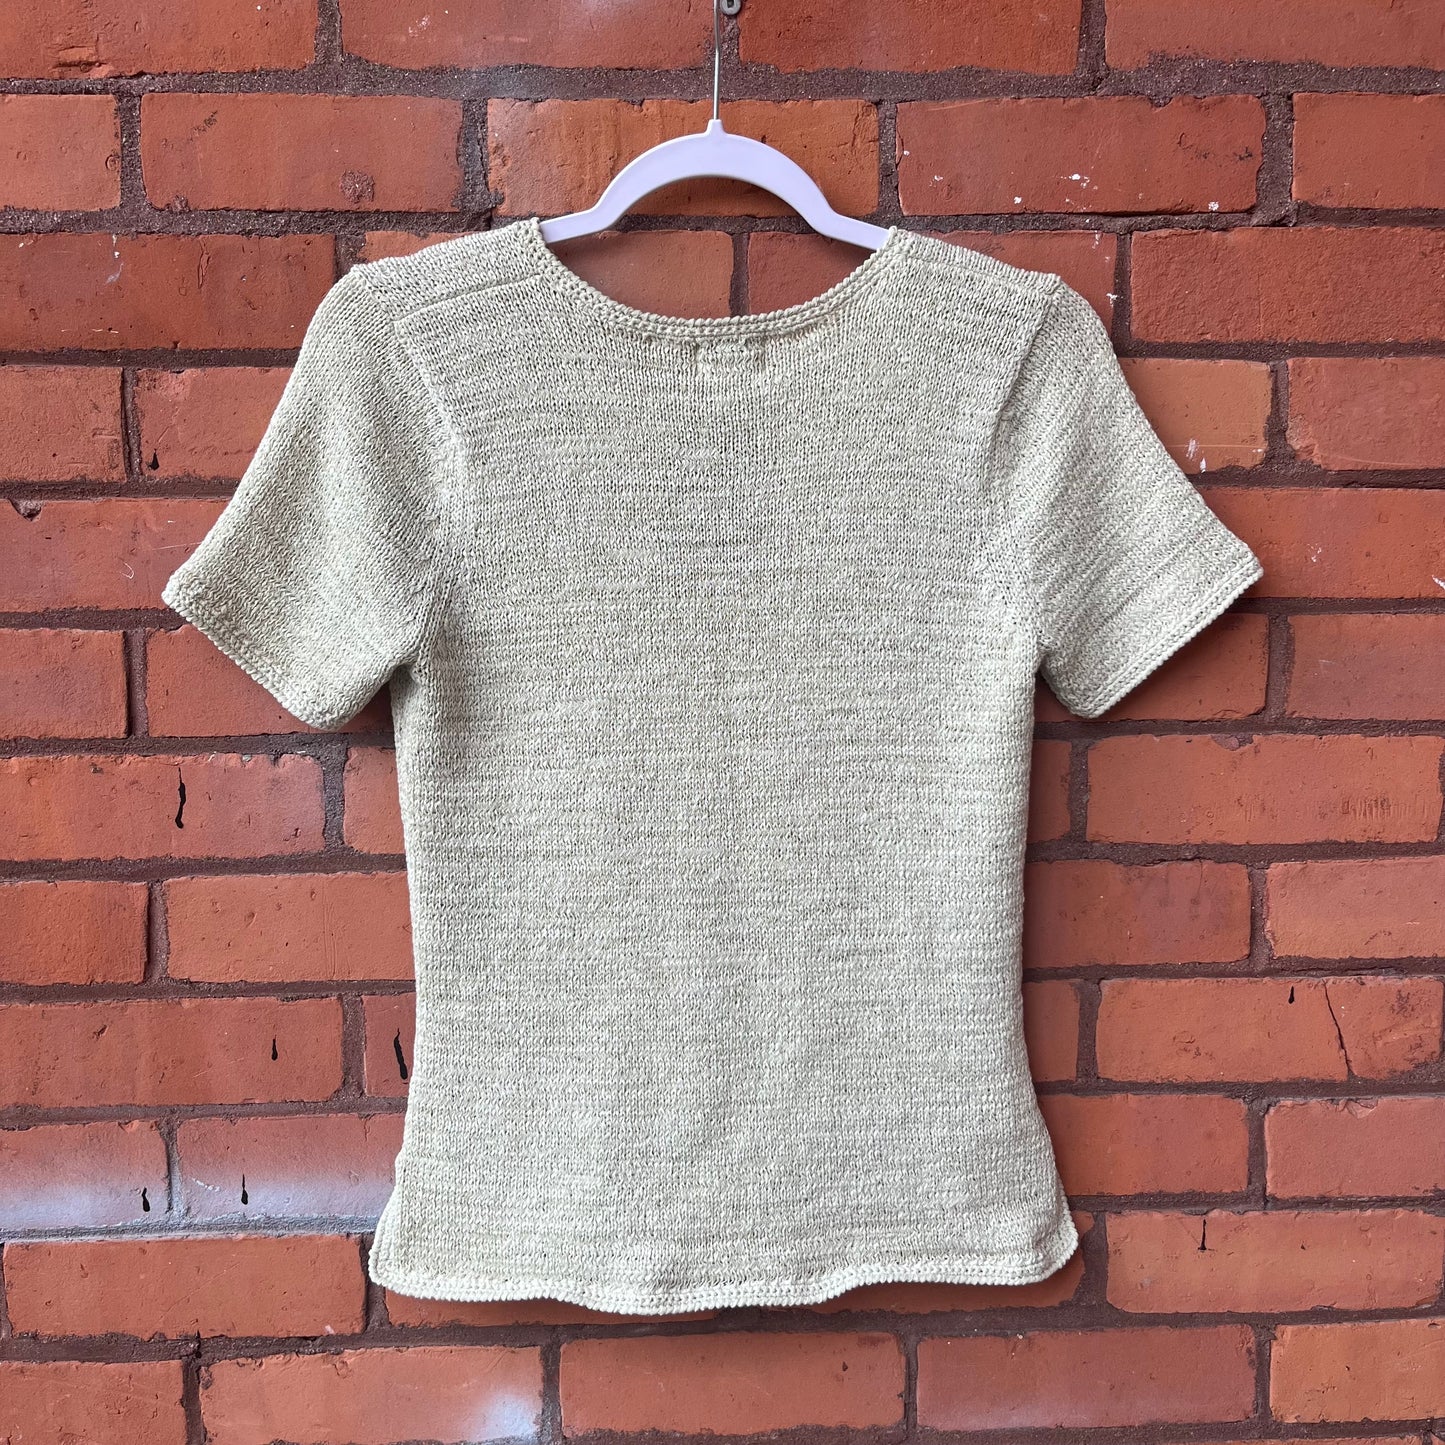 90’s Vintage Chartreuse Knit Tshirt / Size M